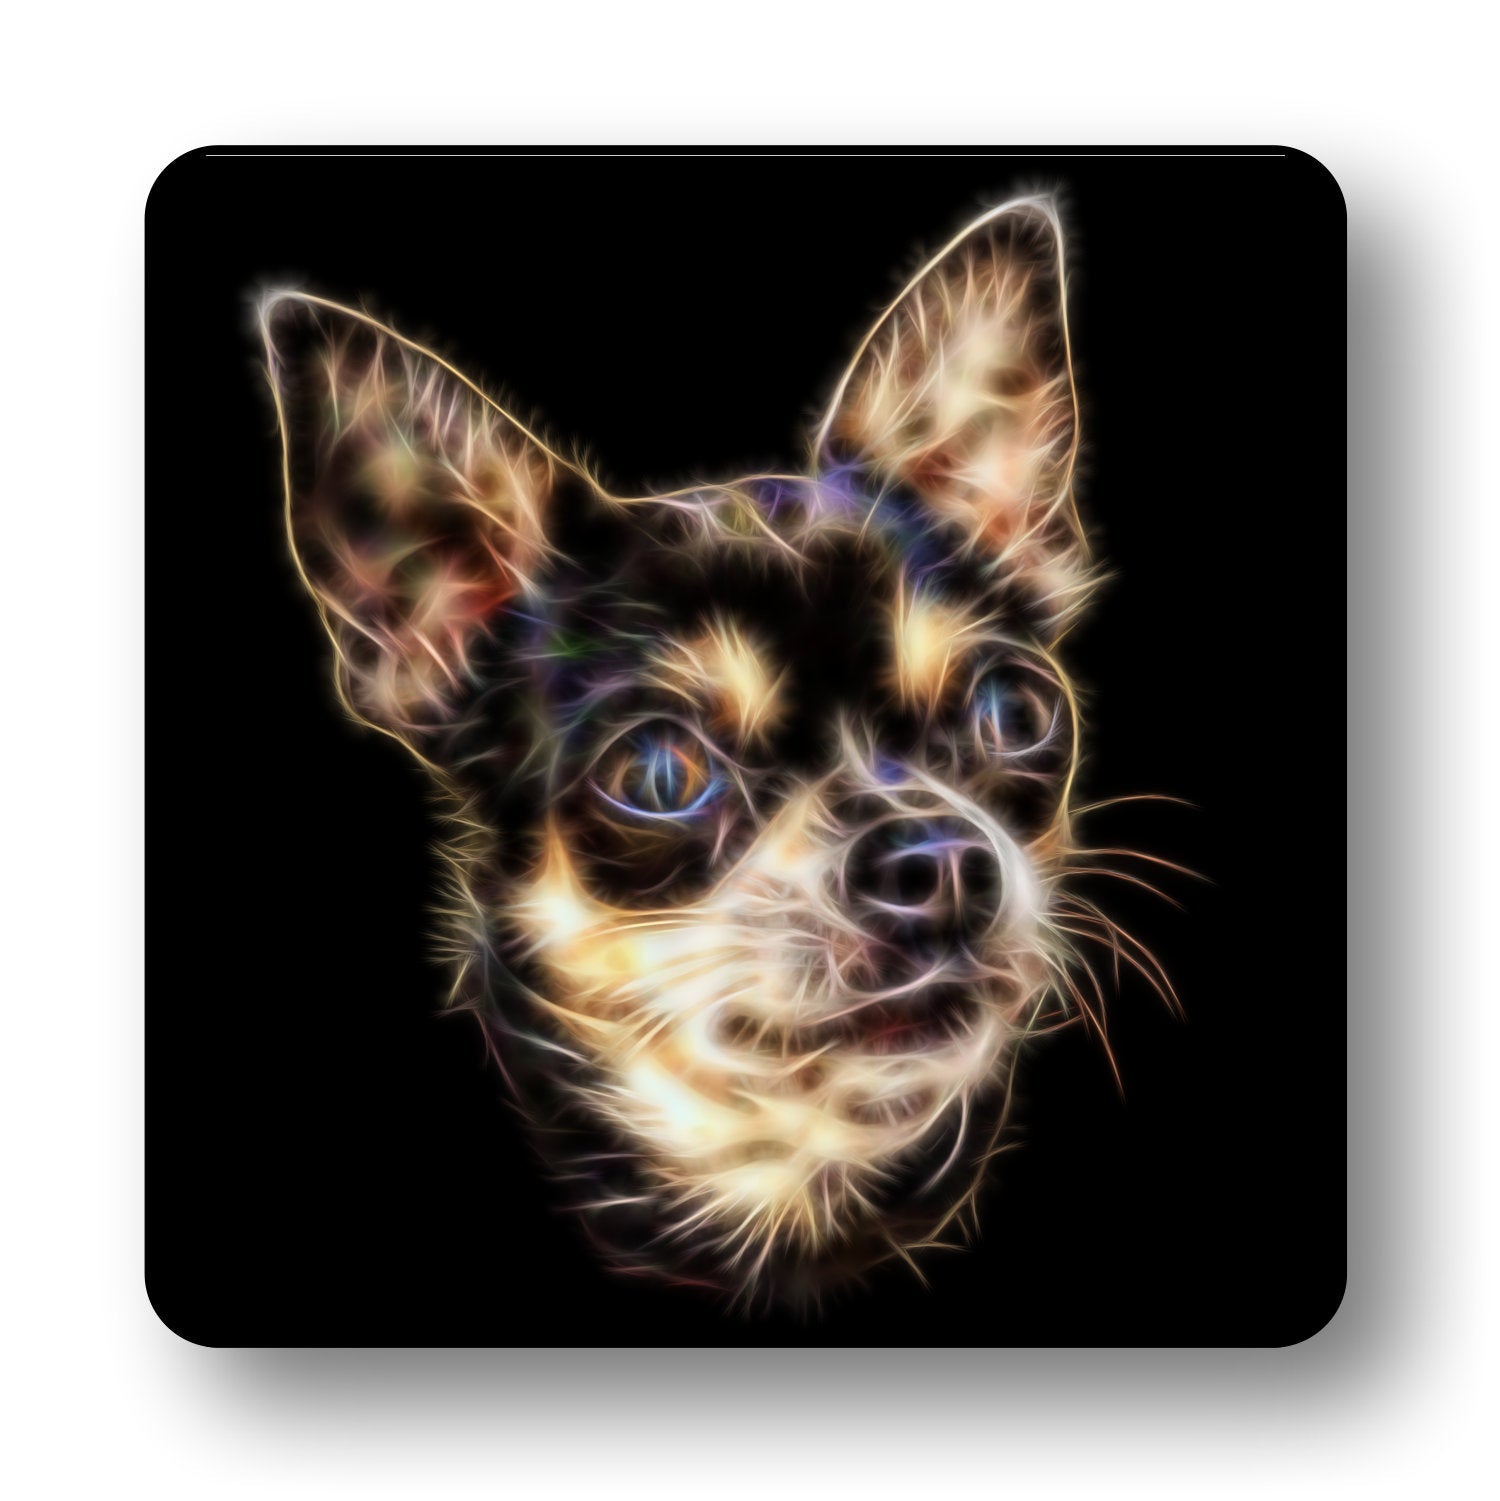 Chihuahua Coasters, Set of 2, with Fractal Art Design. Chocolate and Tan.